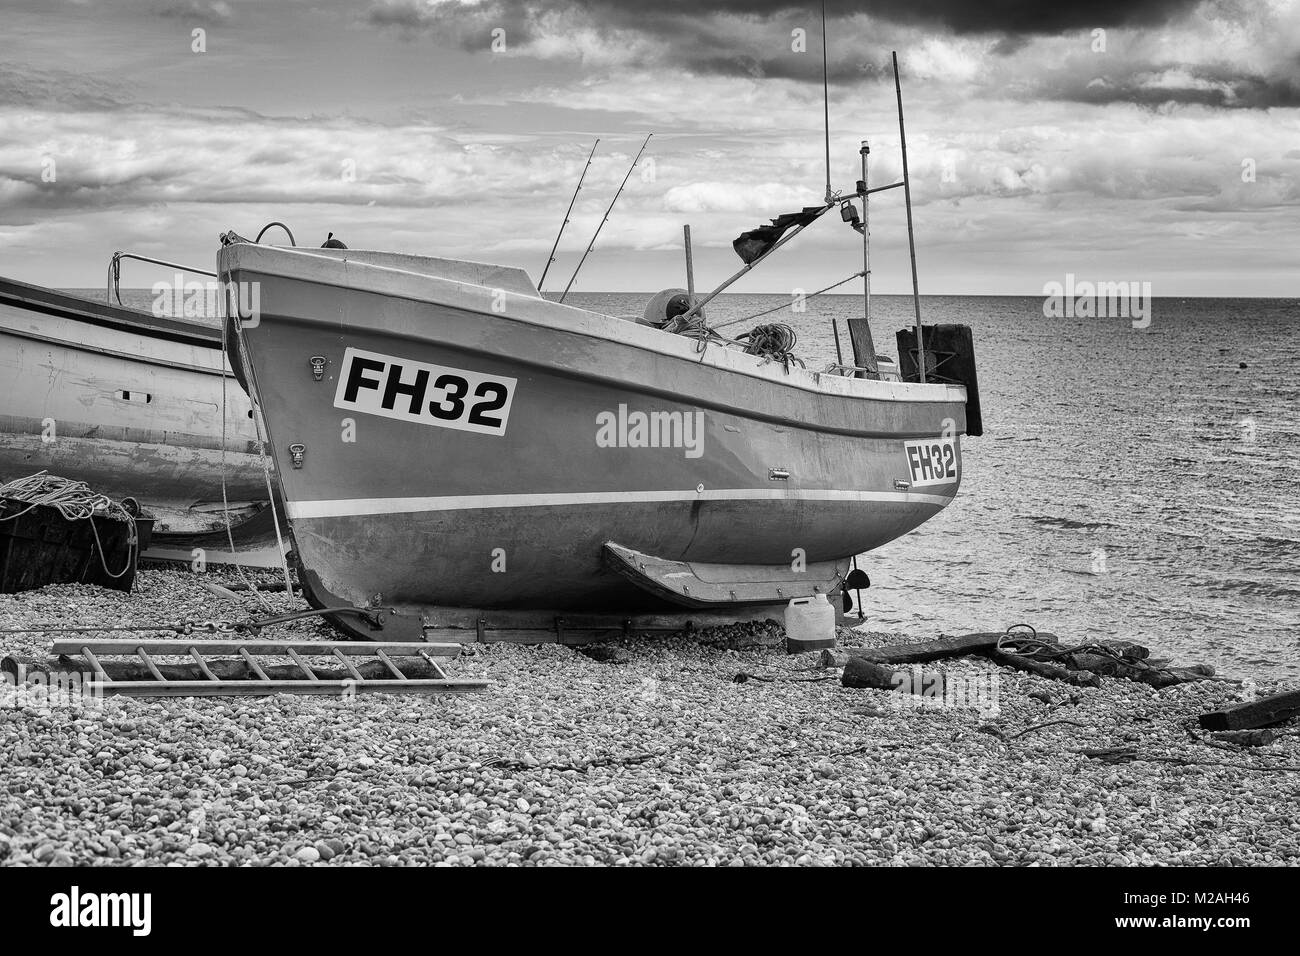 Fishing boat on the beach at Beer (Sidmouth), Dorset UK. Shot in Black & White Stock Photo